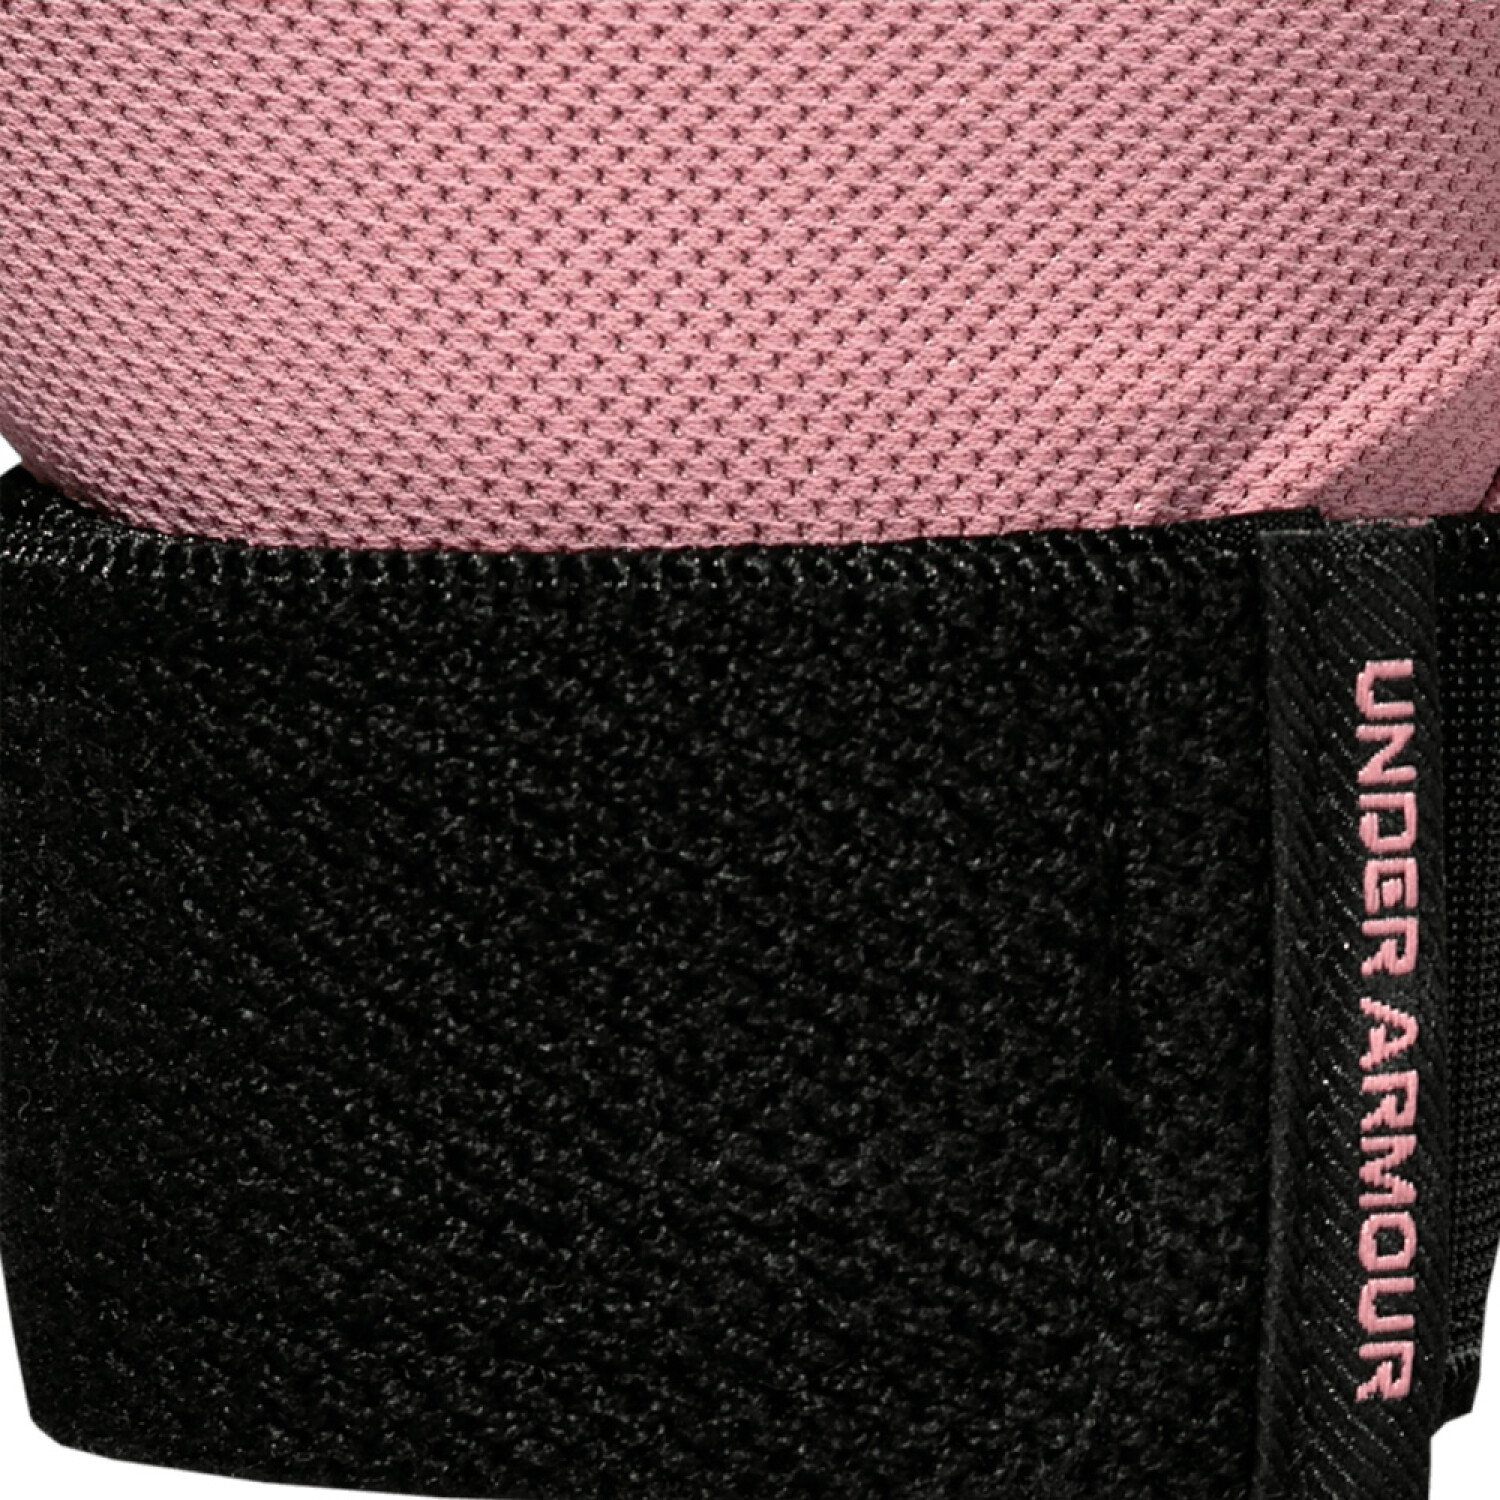 Guantes De Entrenamiento Under Armour Weighlifting Mujer Rosa